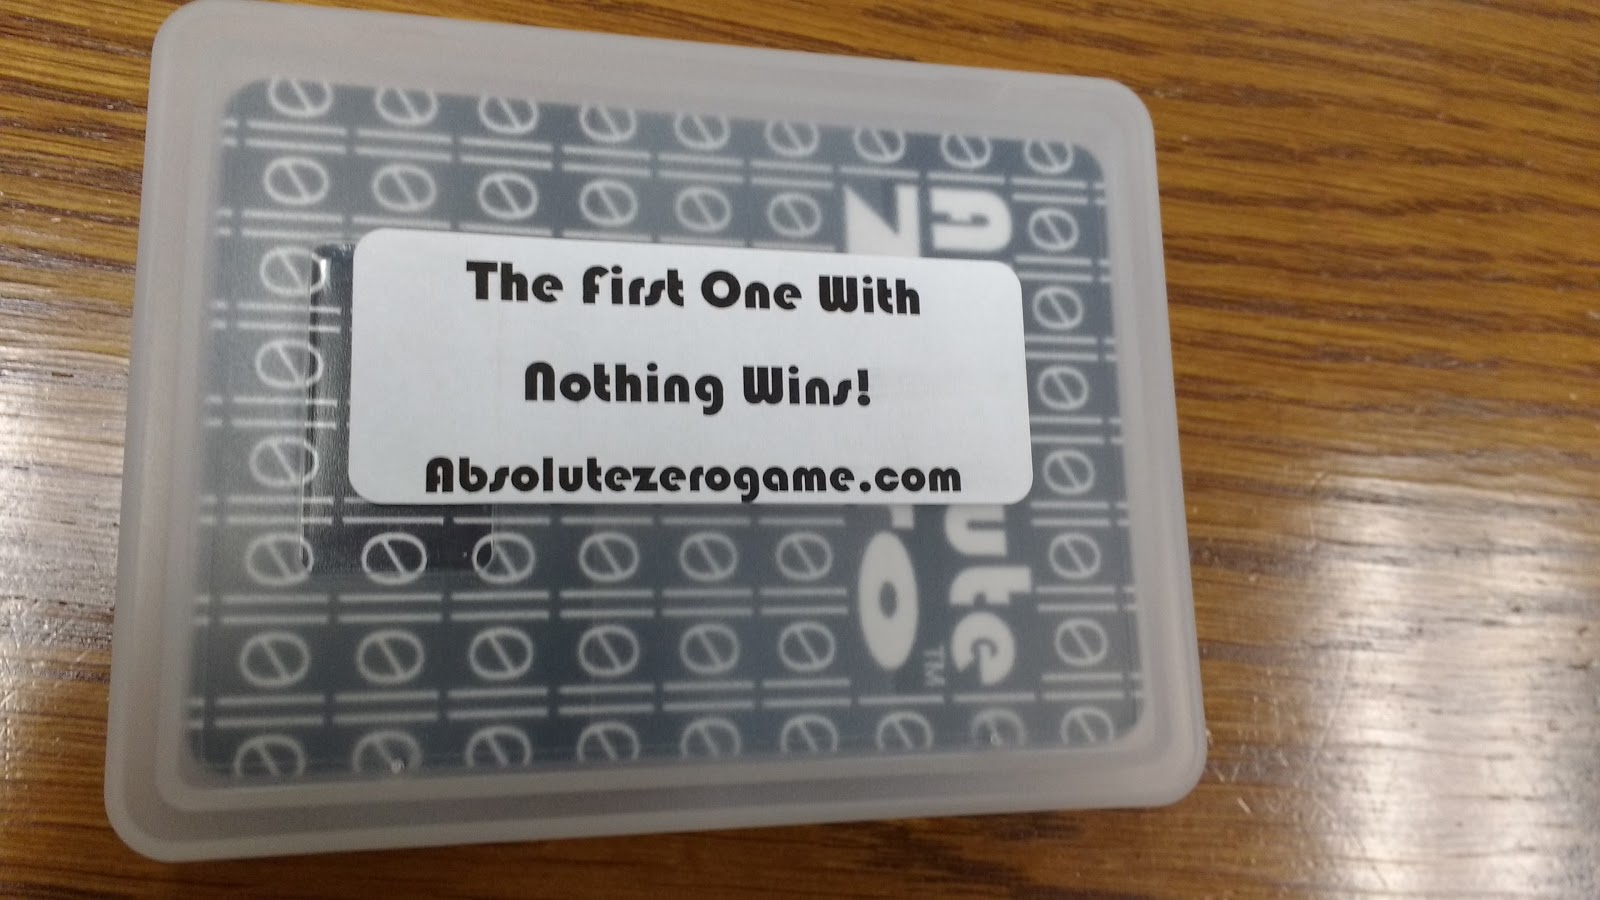 absolute zero card game for math class